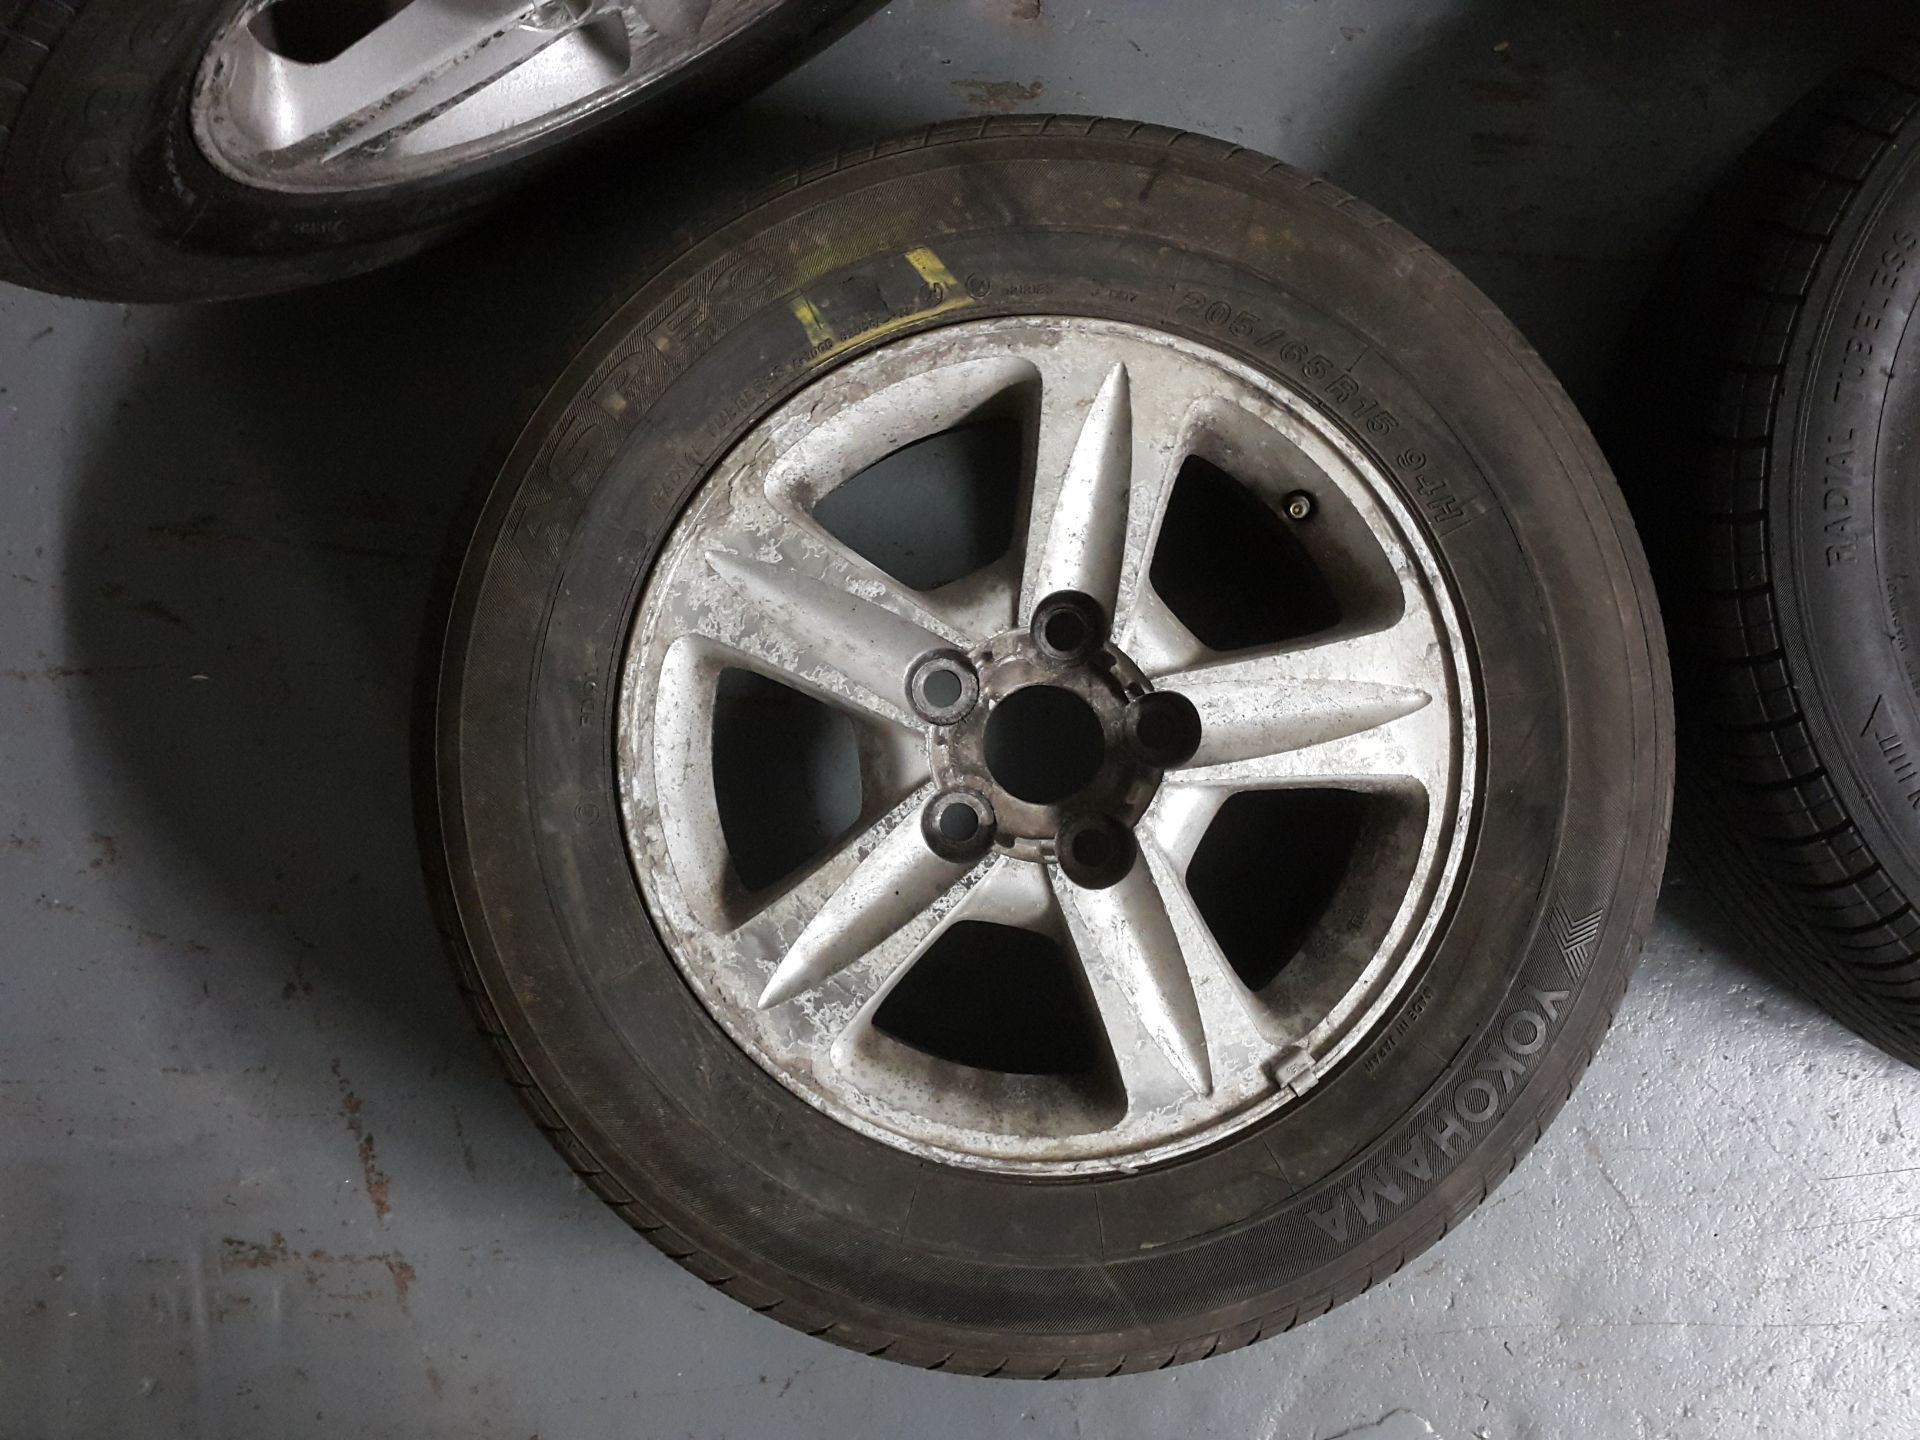 5 X TOYOTA PREVIA 15" ALLOY WHEELS WITH TYRES 205/65/15 (2 GOODYEAR 2 OTHERS) - Image 10 of 11